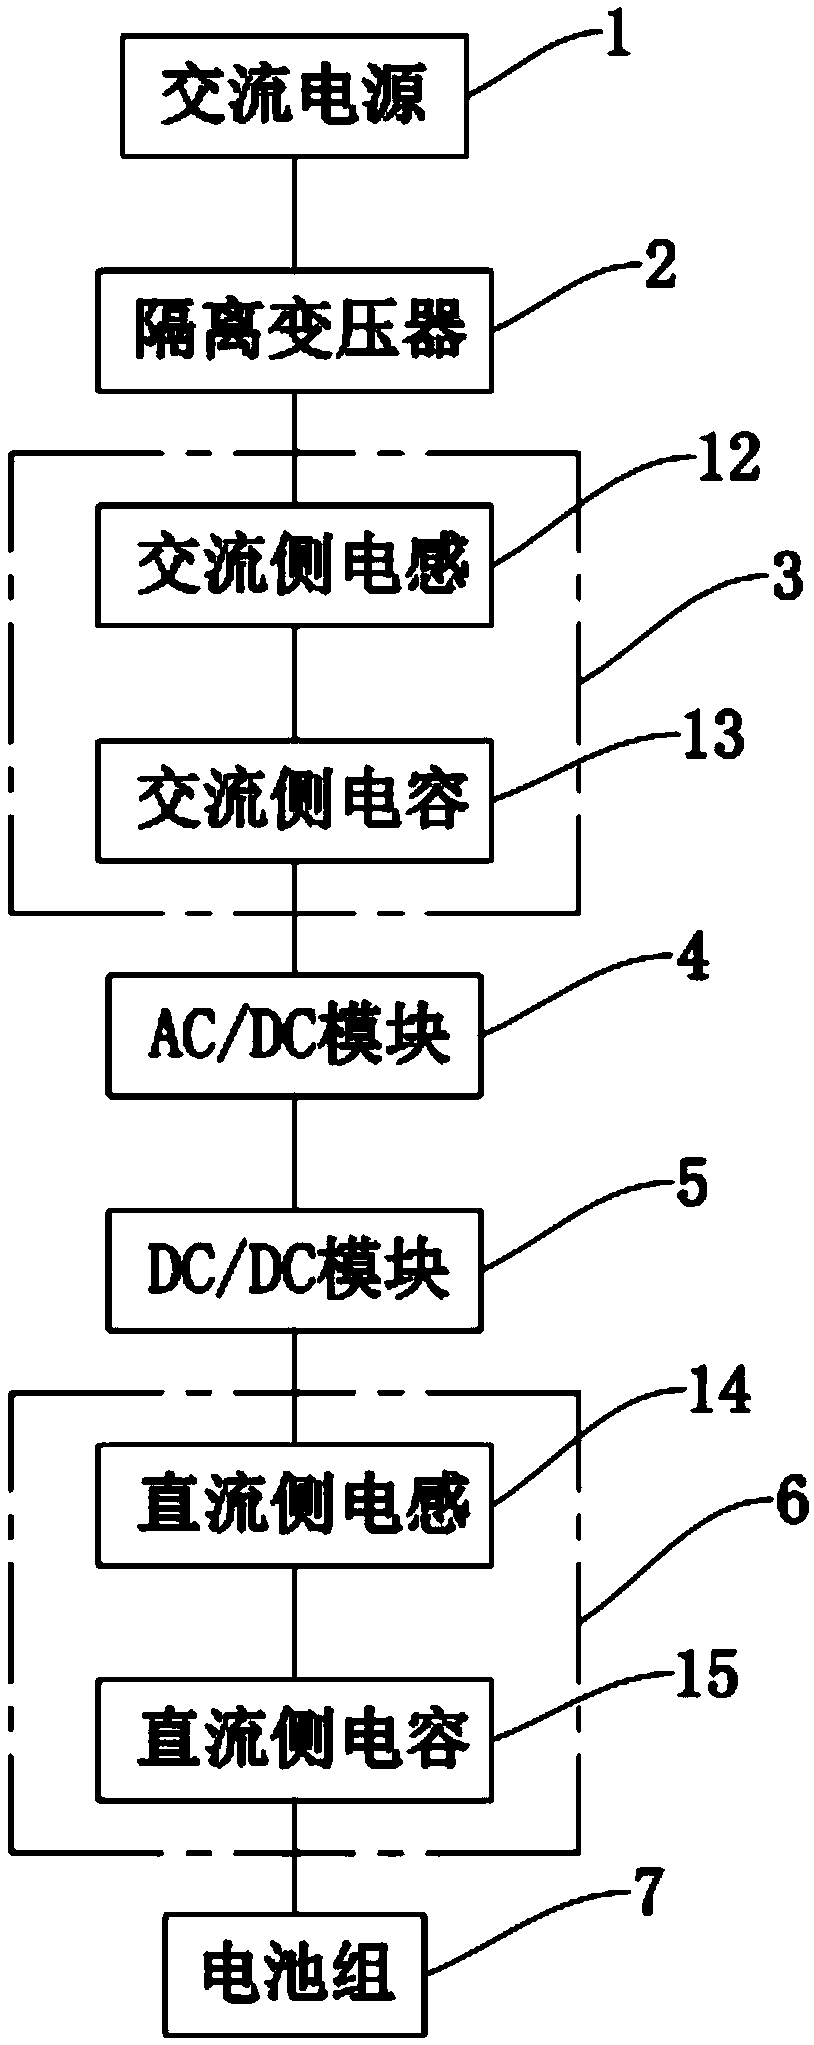 Battery pack charge and discharge detection equipment